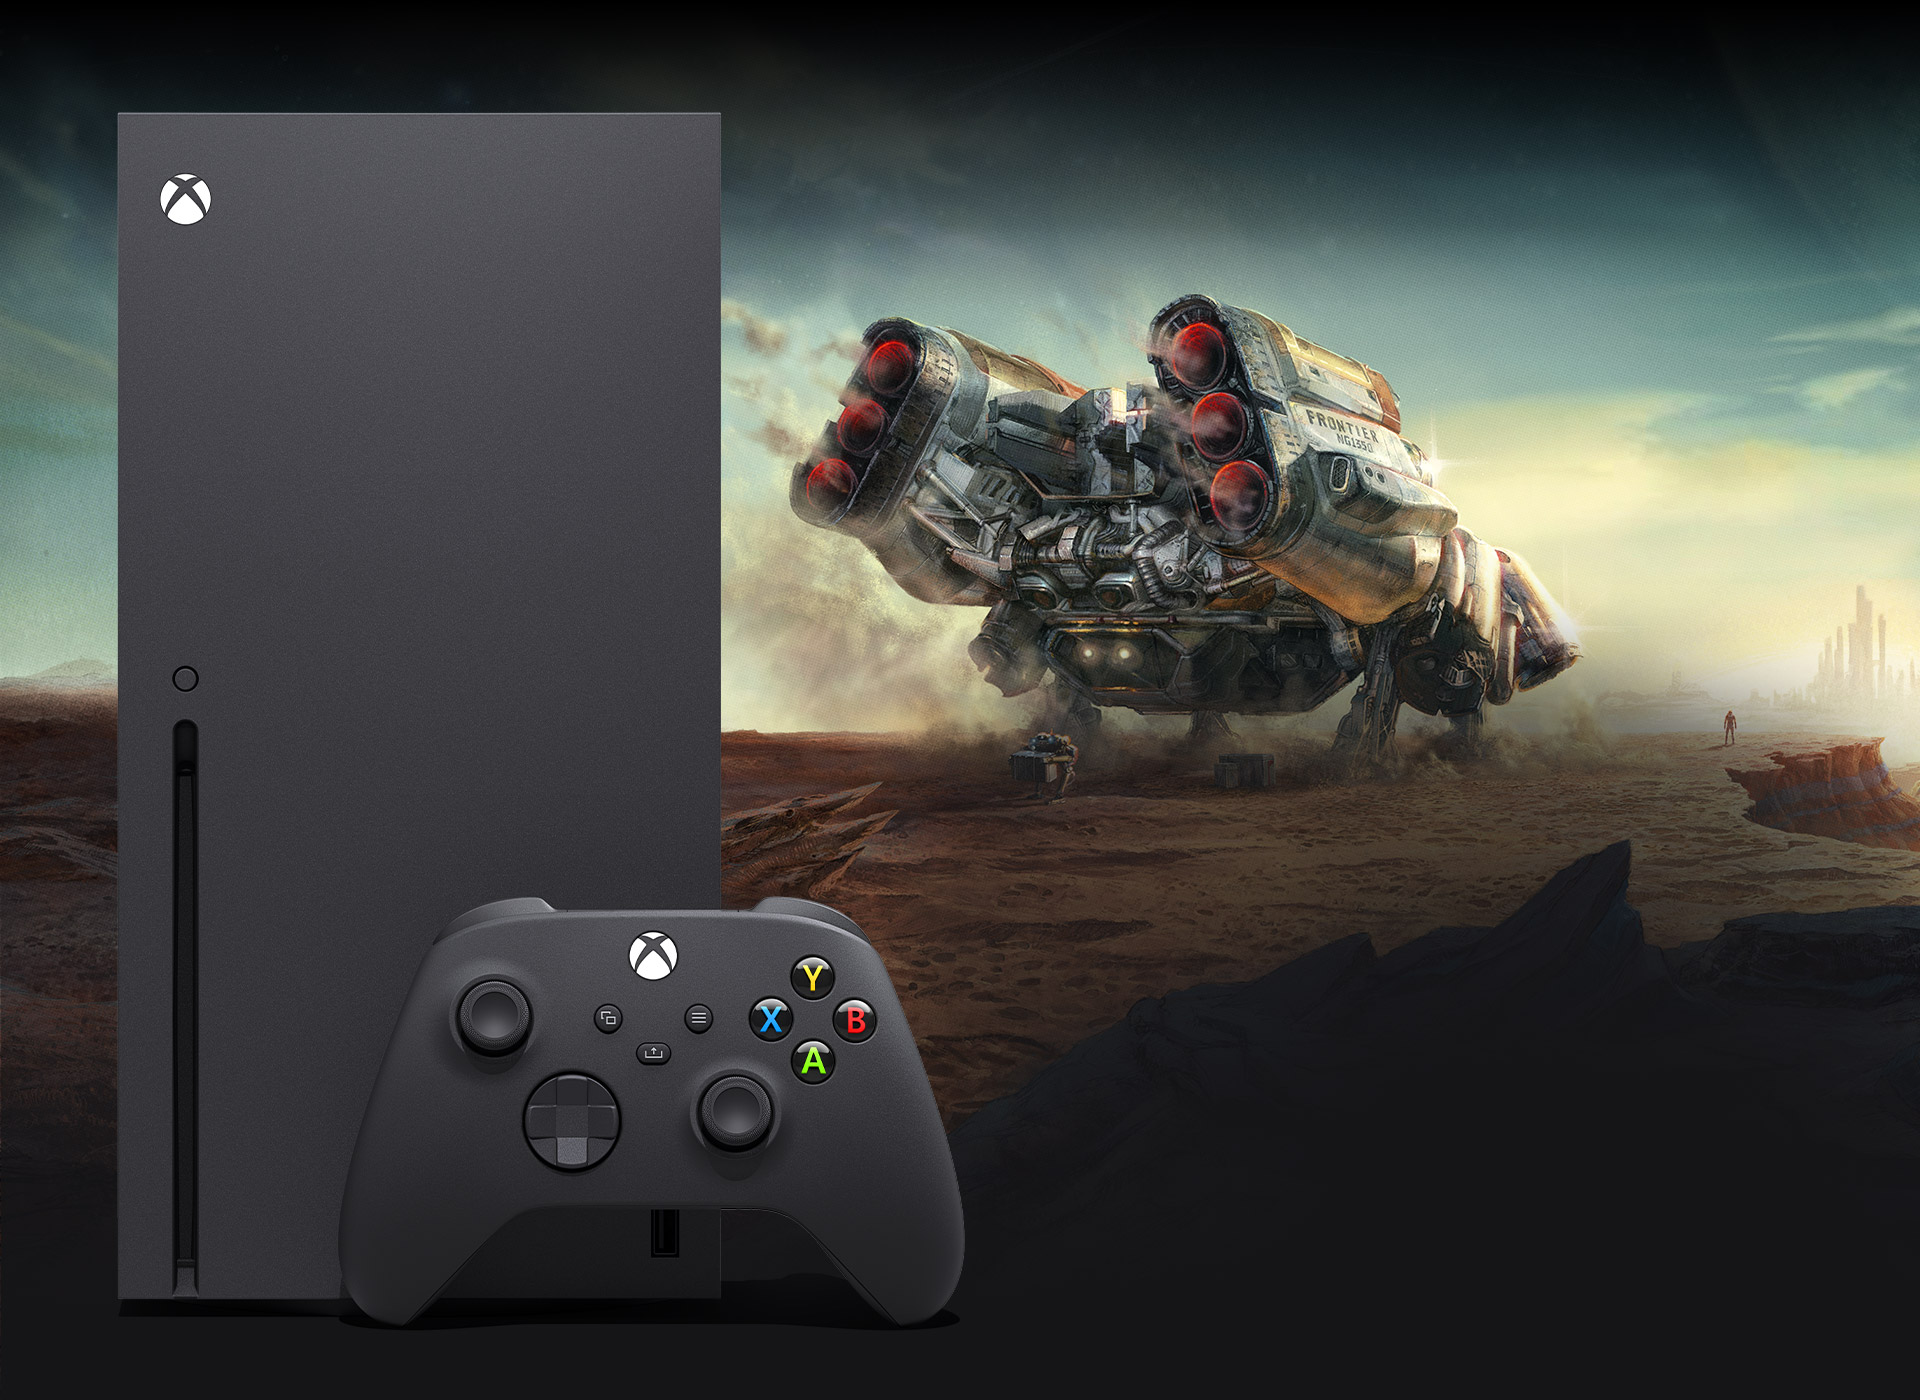 Xbox Series X with grounded characters in the background